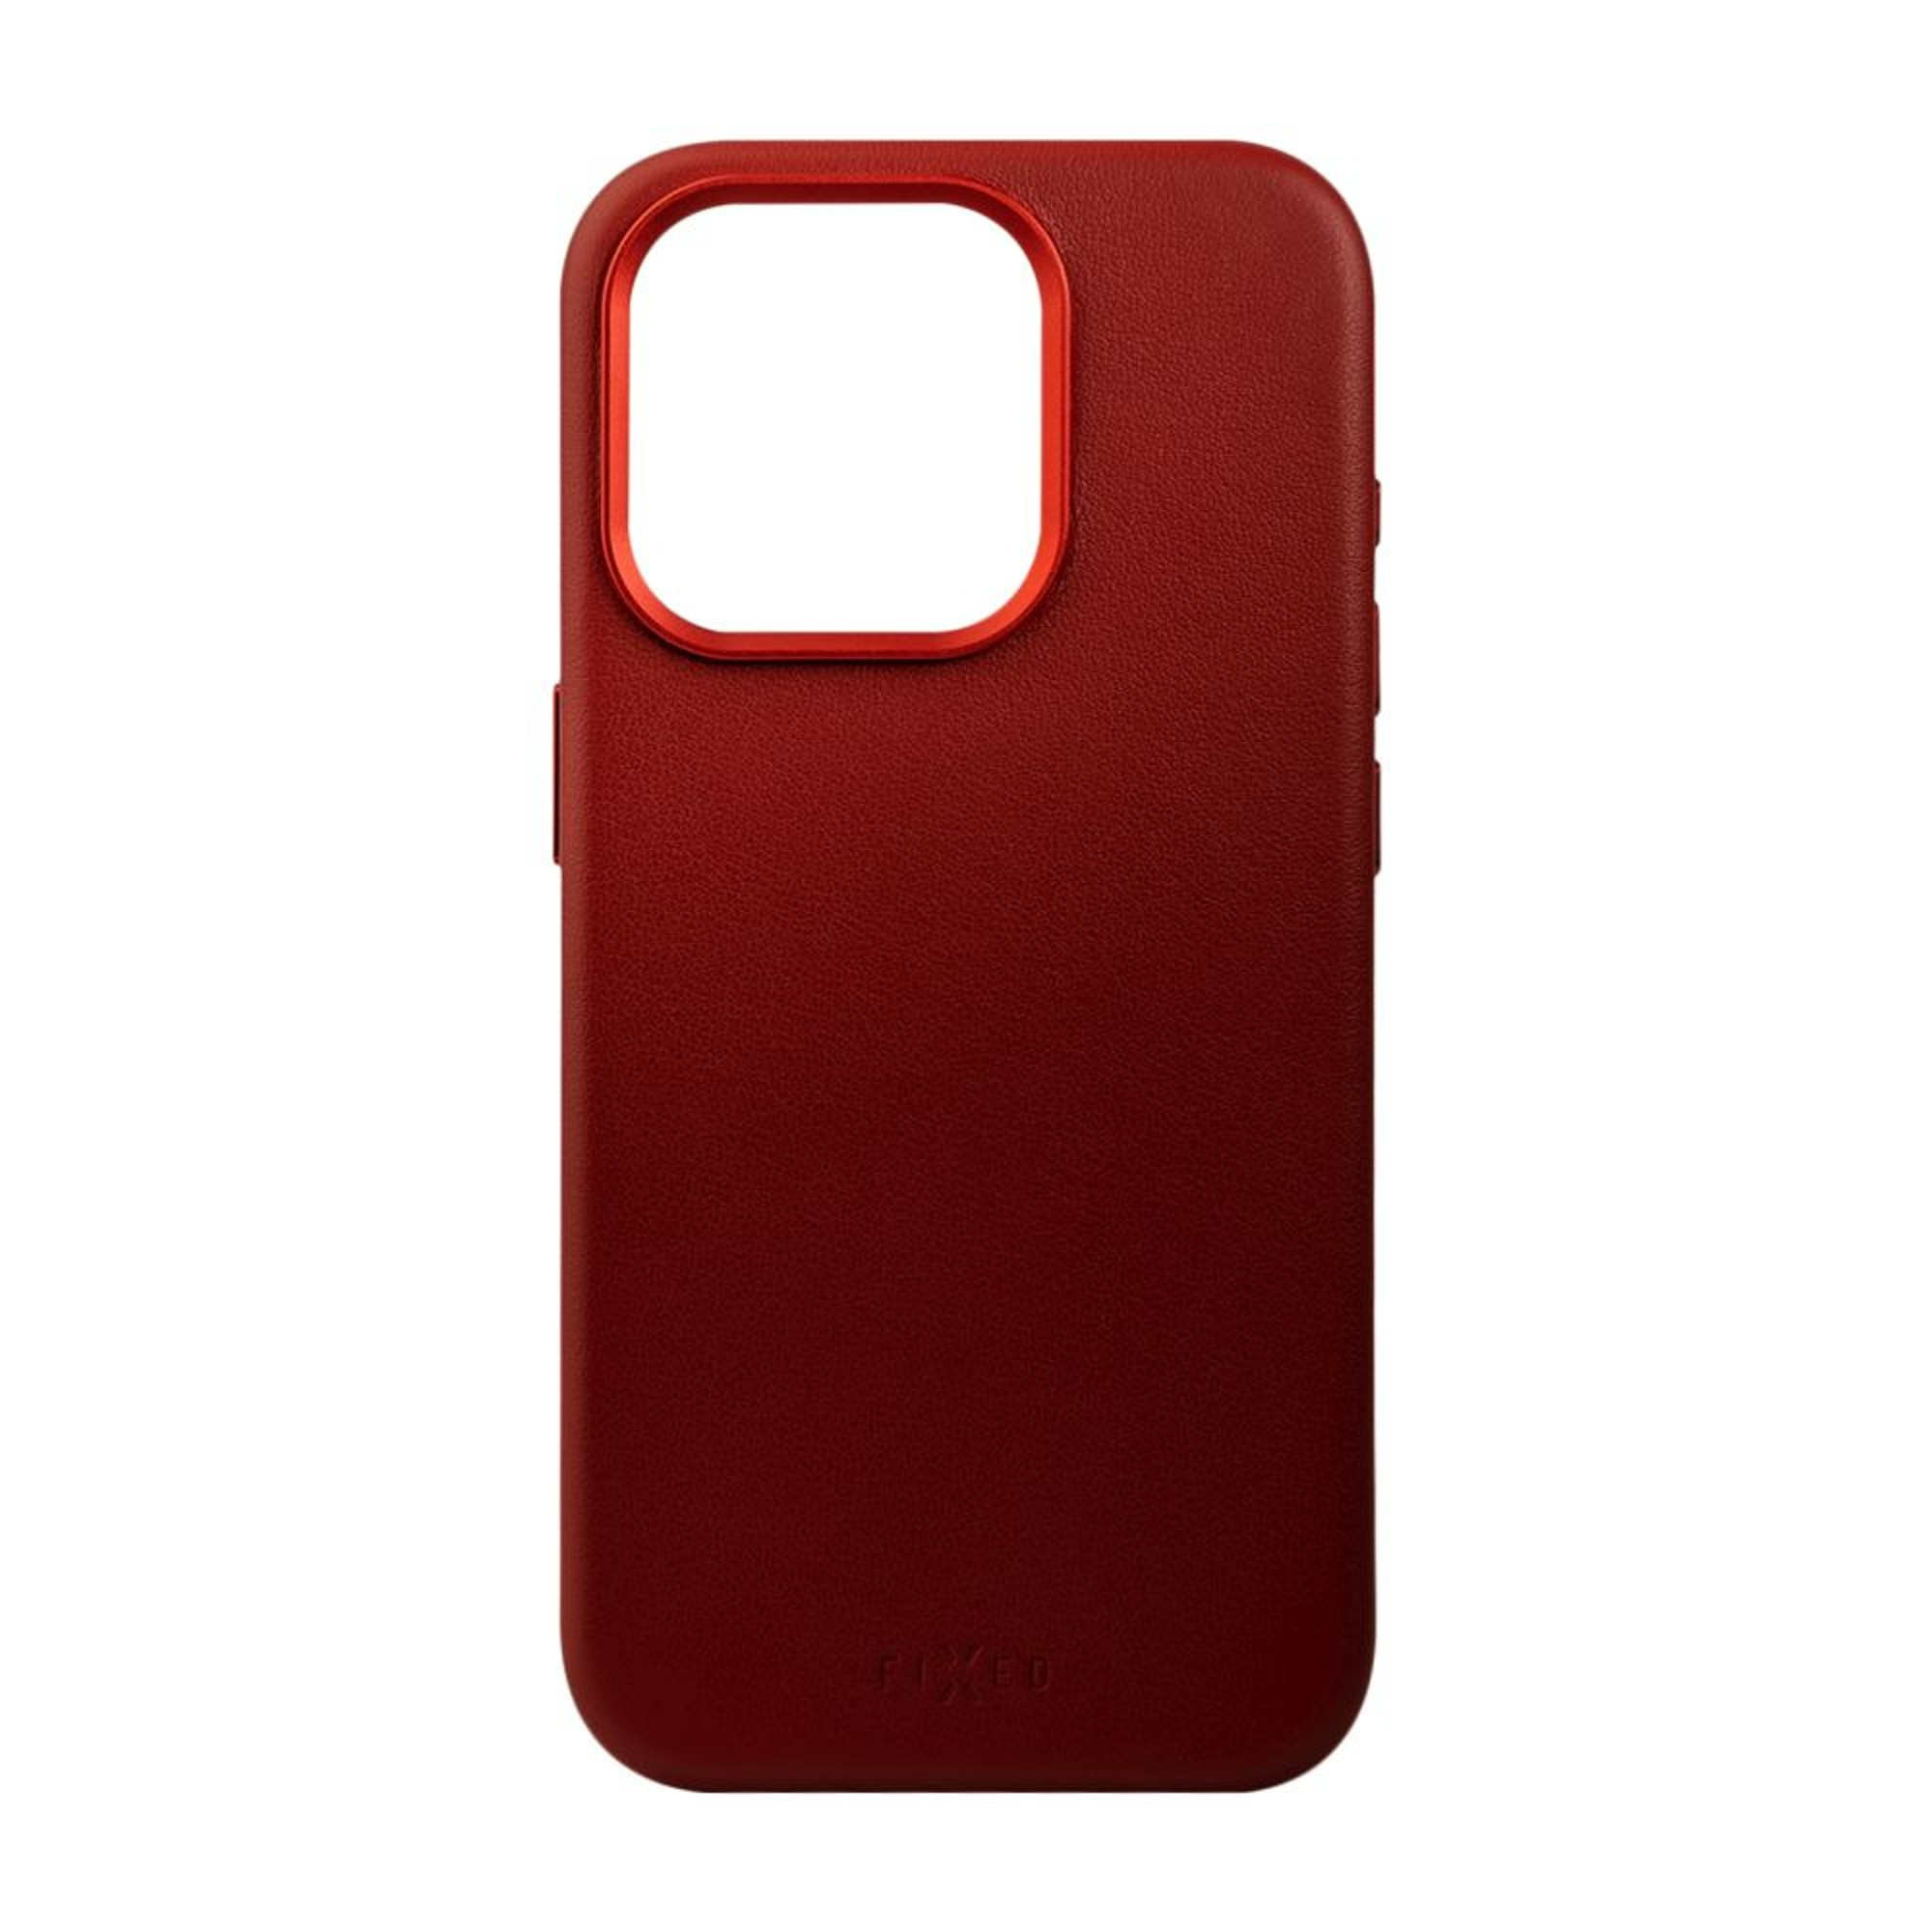 Backcover, FIXLM-1200-RD, iPhone MagLeather 15, Rot FIXED Apple,